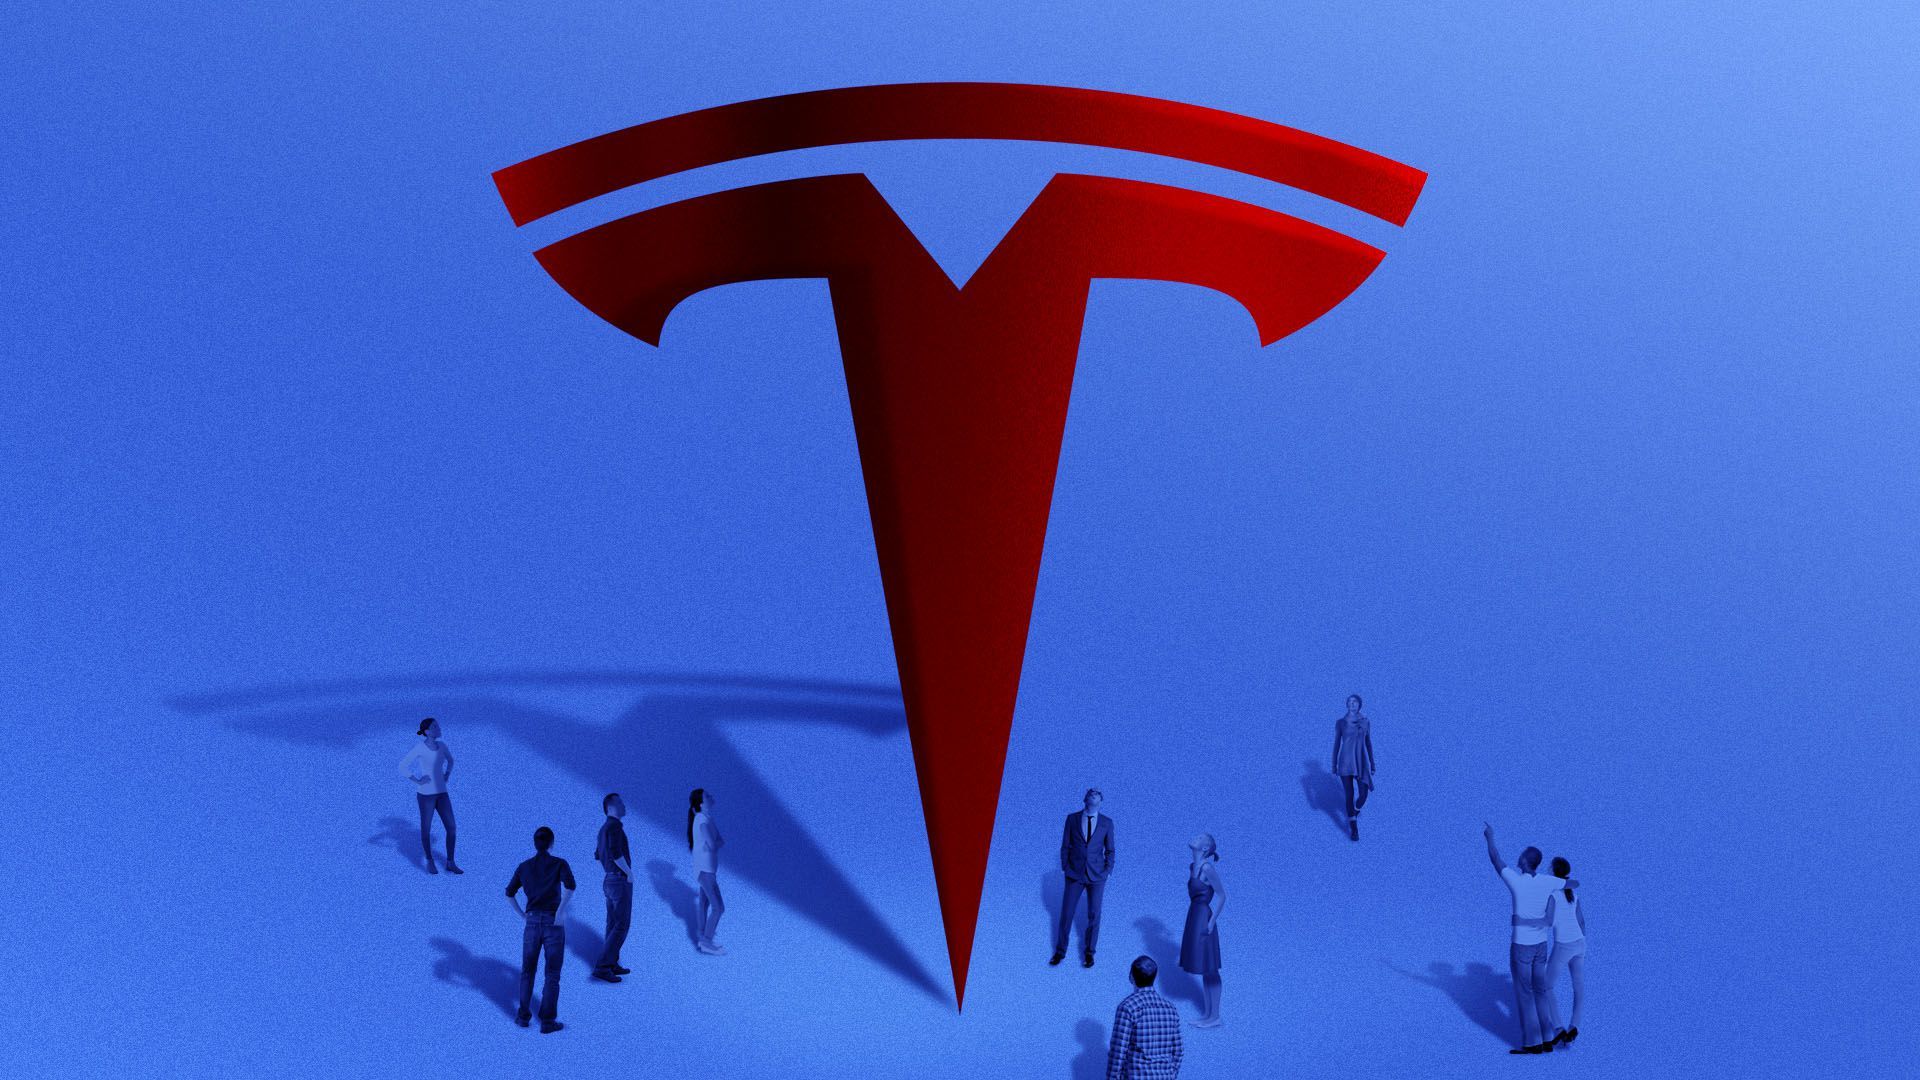 Illustration of people surrounding and looking up at a giant Tesla logo 